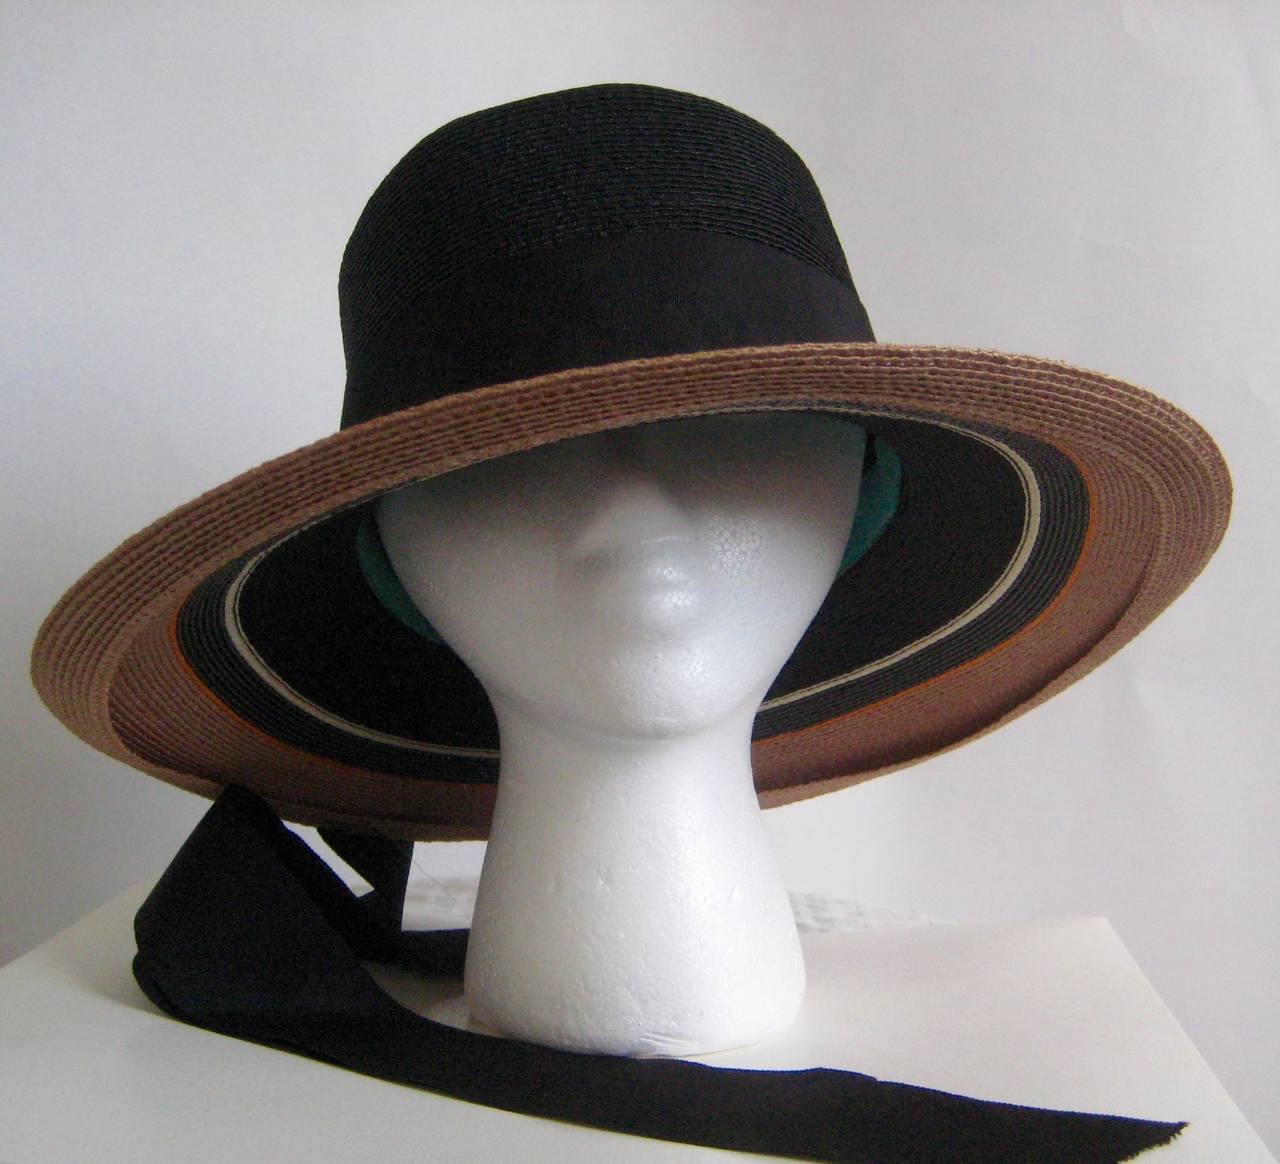 Lovely 1960s Yves Saint Laurent straw hat with a wide striped brim and long ribbon streamers.Signature turquoise grosgrain interior ribbon .Label is missing This perfect summer hat is in excellent condition and it measures 22